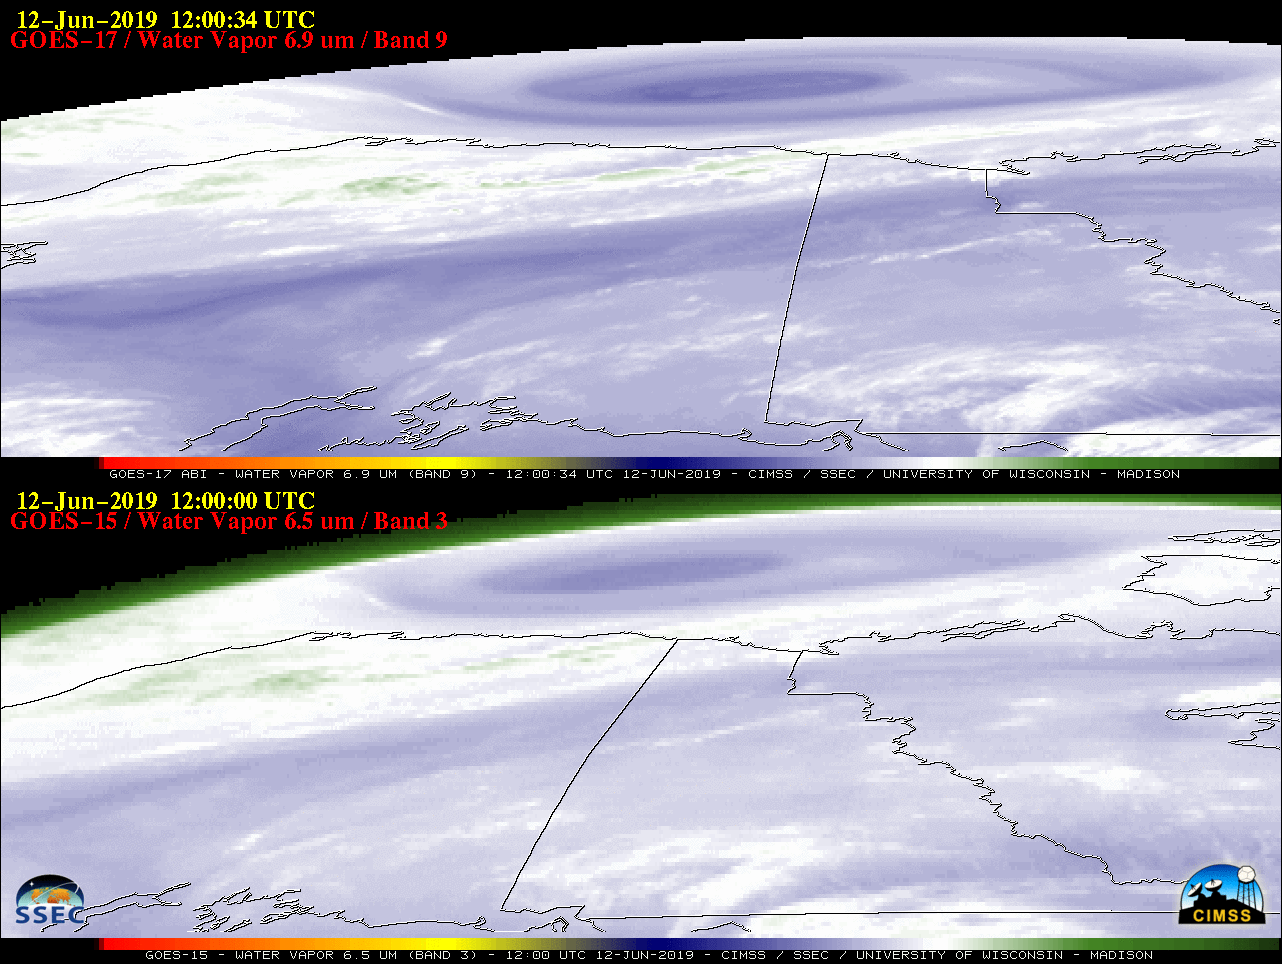 GOES-17 Mid-leve Water Vapor (6.9 µm, top) and GOES-15 Water Vapor (6.5 µm. bottom) imagess [click to play animation | MP4]